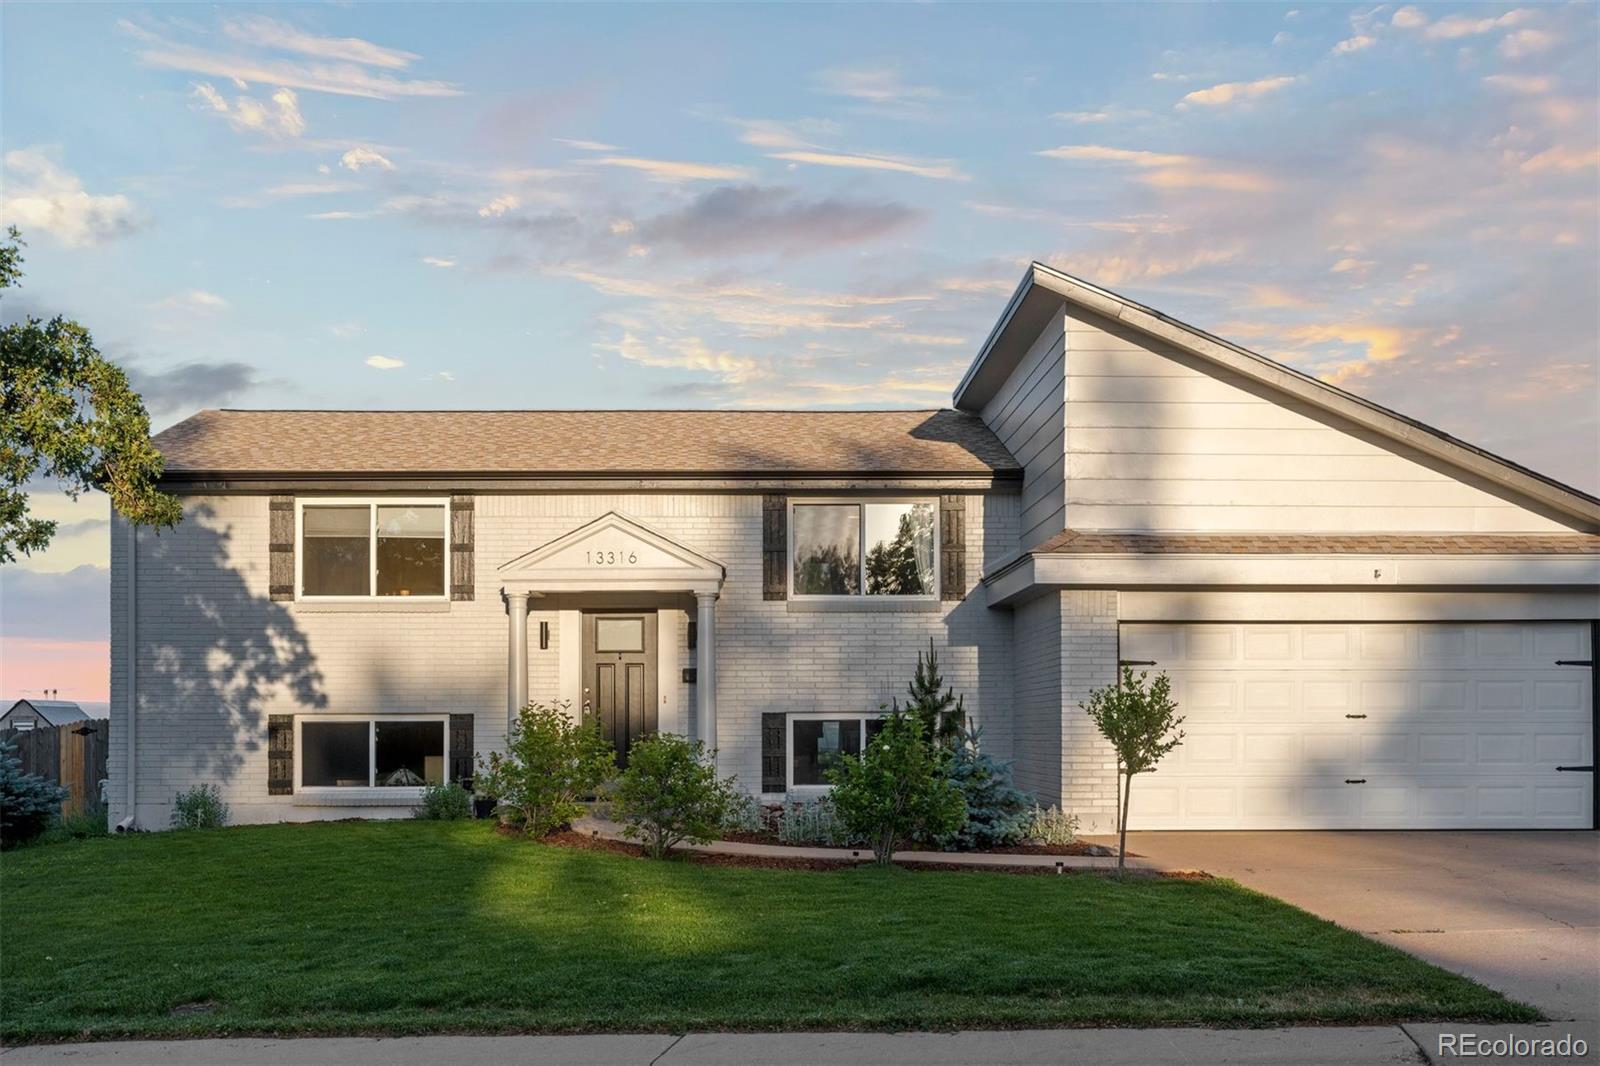 Report Image for 13316 W Center Drive,Lakewood, Colorado